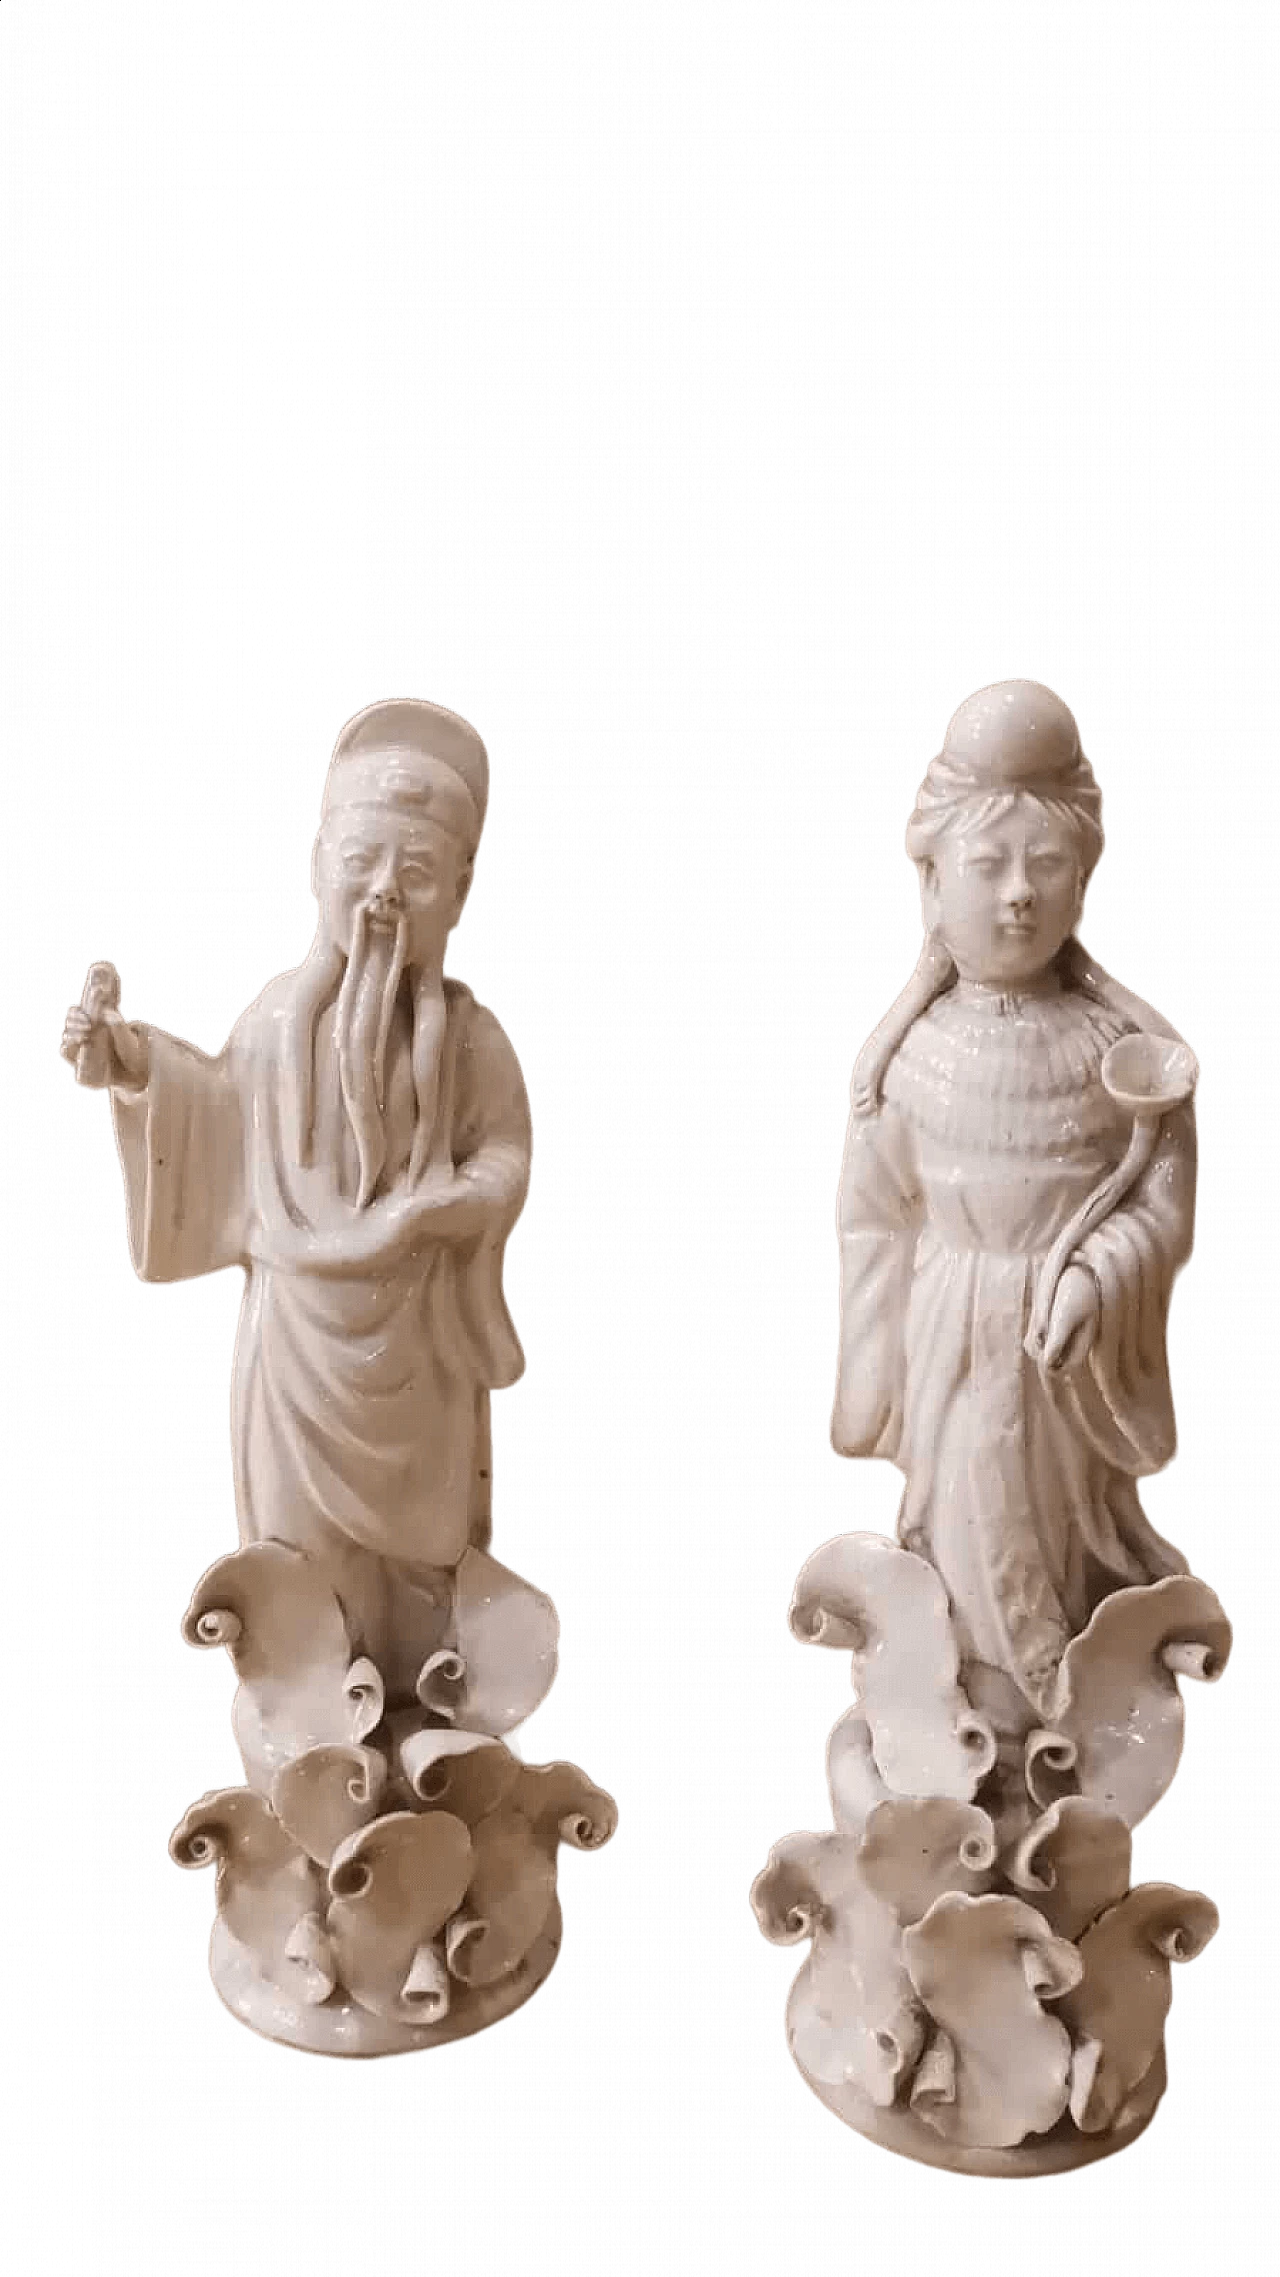 Pair of Chinese white porcelain figurines, late 19th century 8